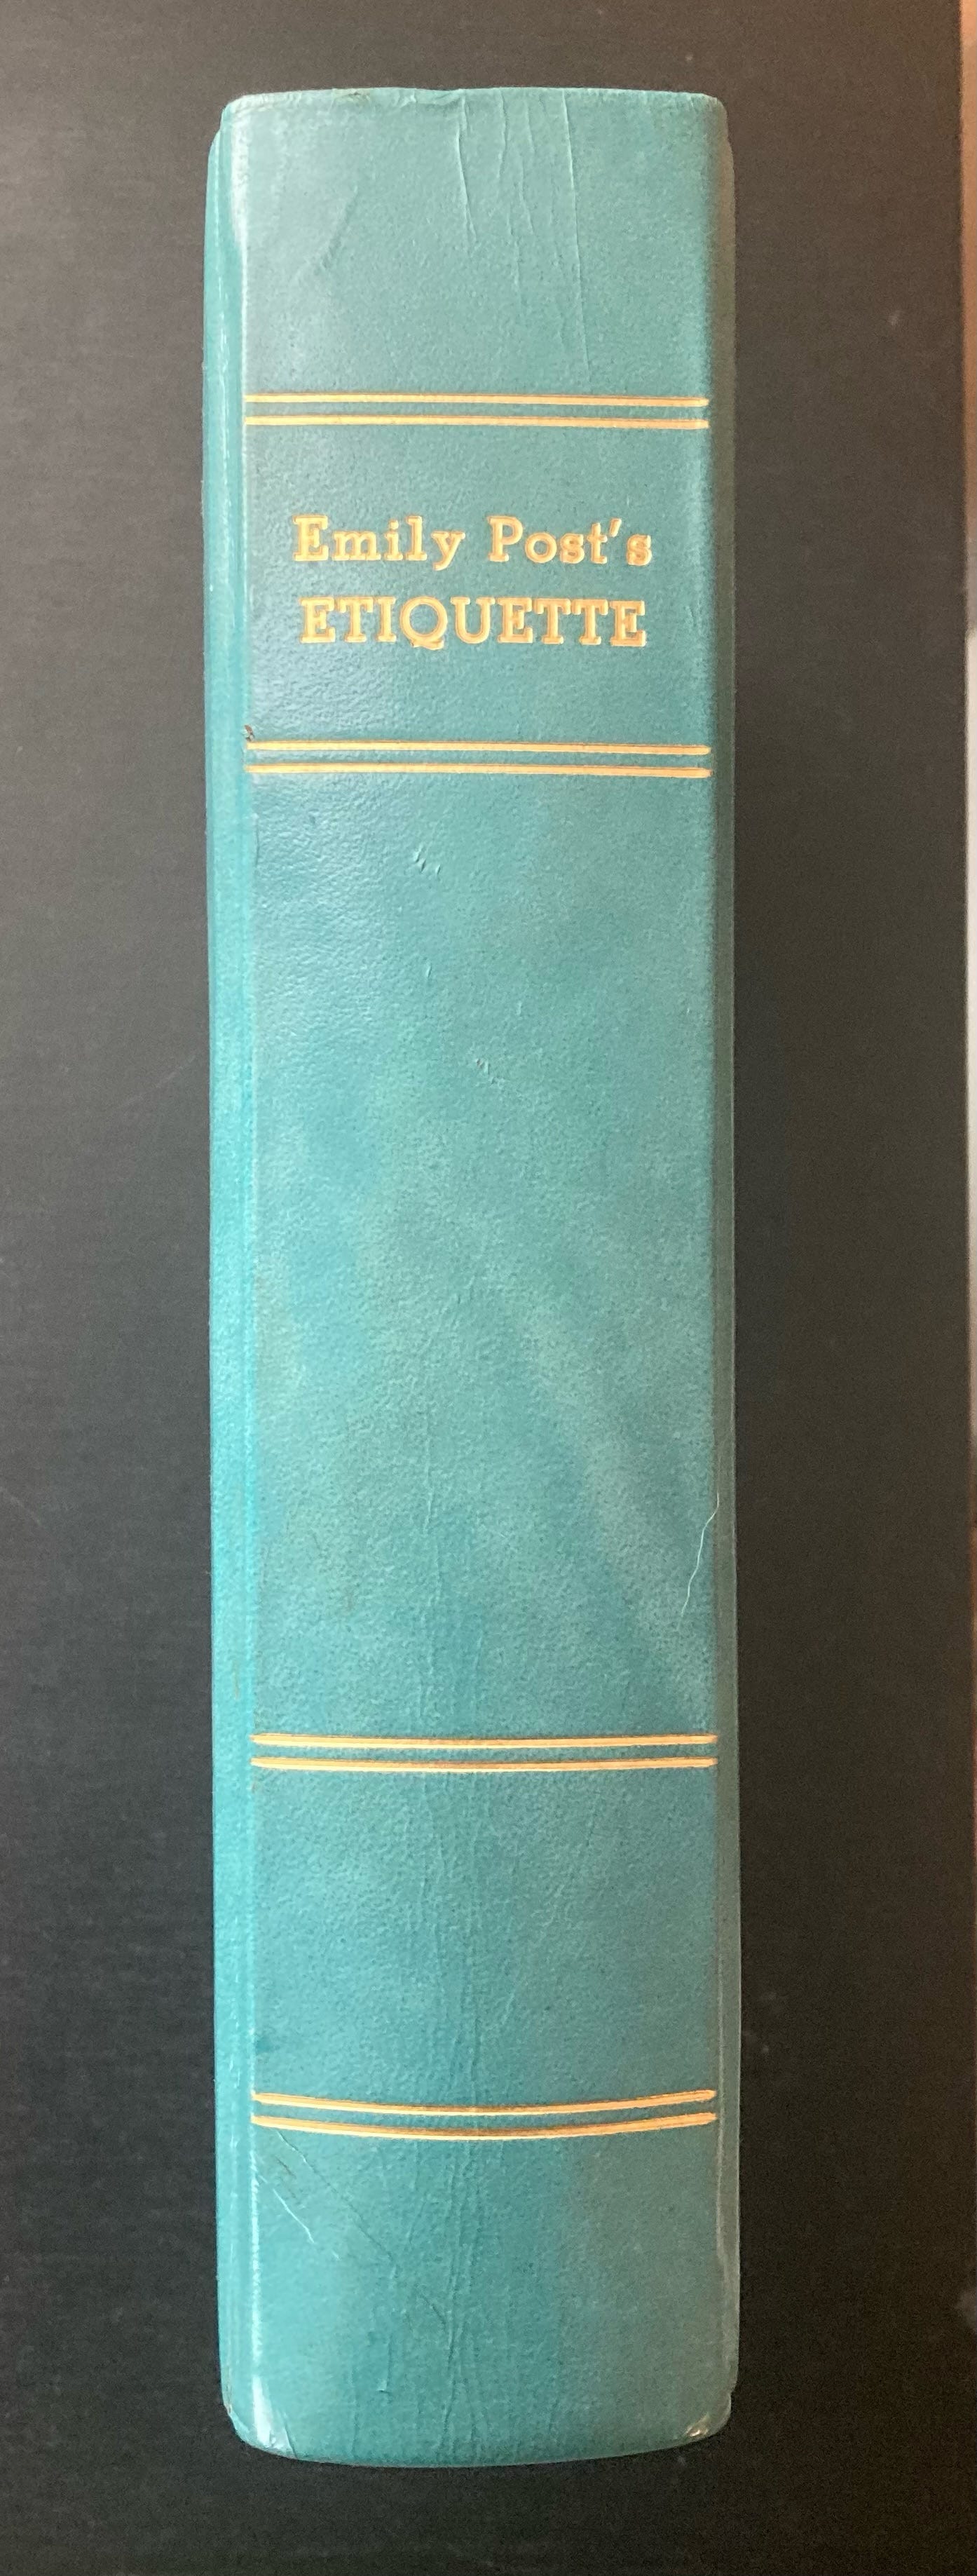 black background, teal leather book spine with gold lettering Emily Post's Etiquette and a few gold lines to help with spacing